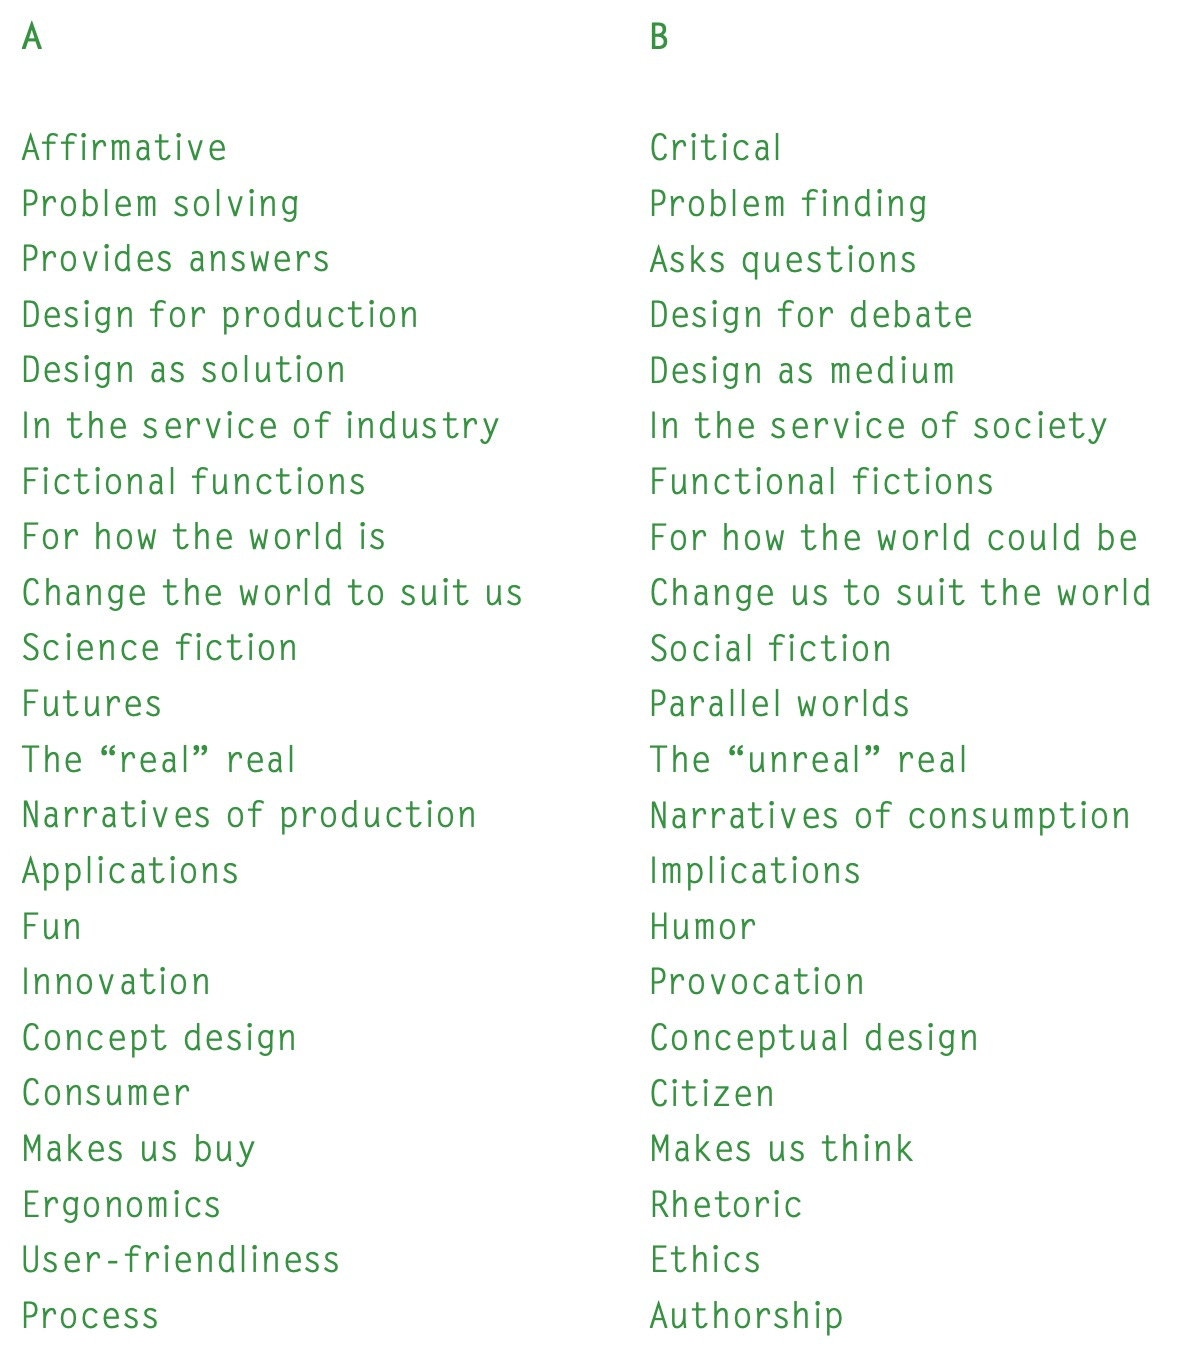 Two columns of words sit side by side, one labeled A and one labeled B. On the A side are practical words and phrases, like "problem solving," "provides answers," "design as solution," and "applications," and on the B side are the opposites: ideas like "problem finding," "asks questions," design as medium," and "implications."